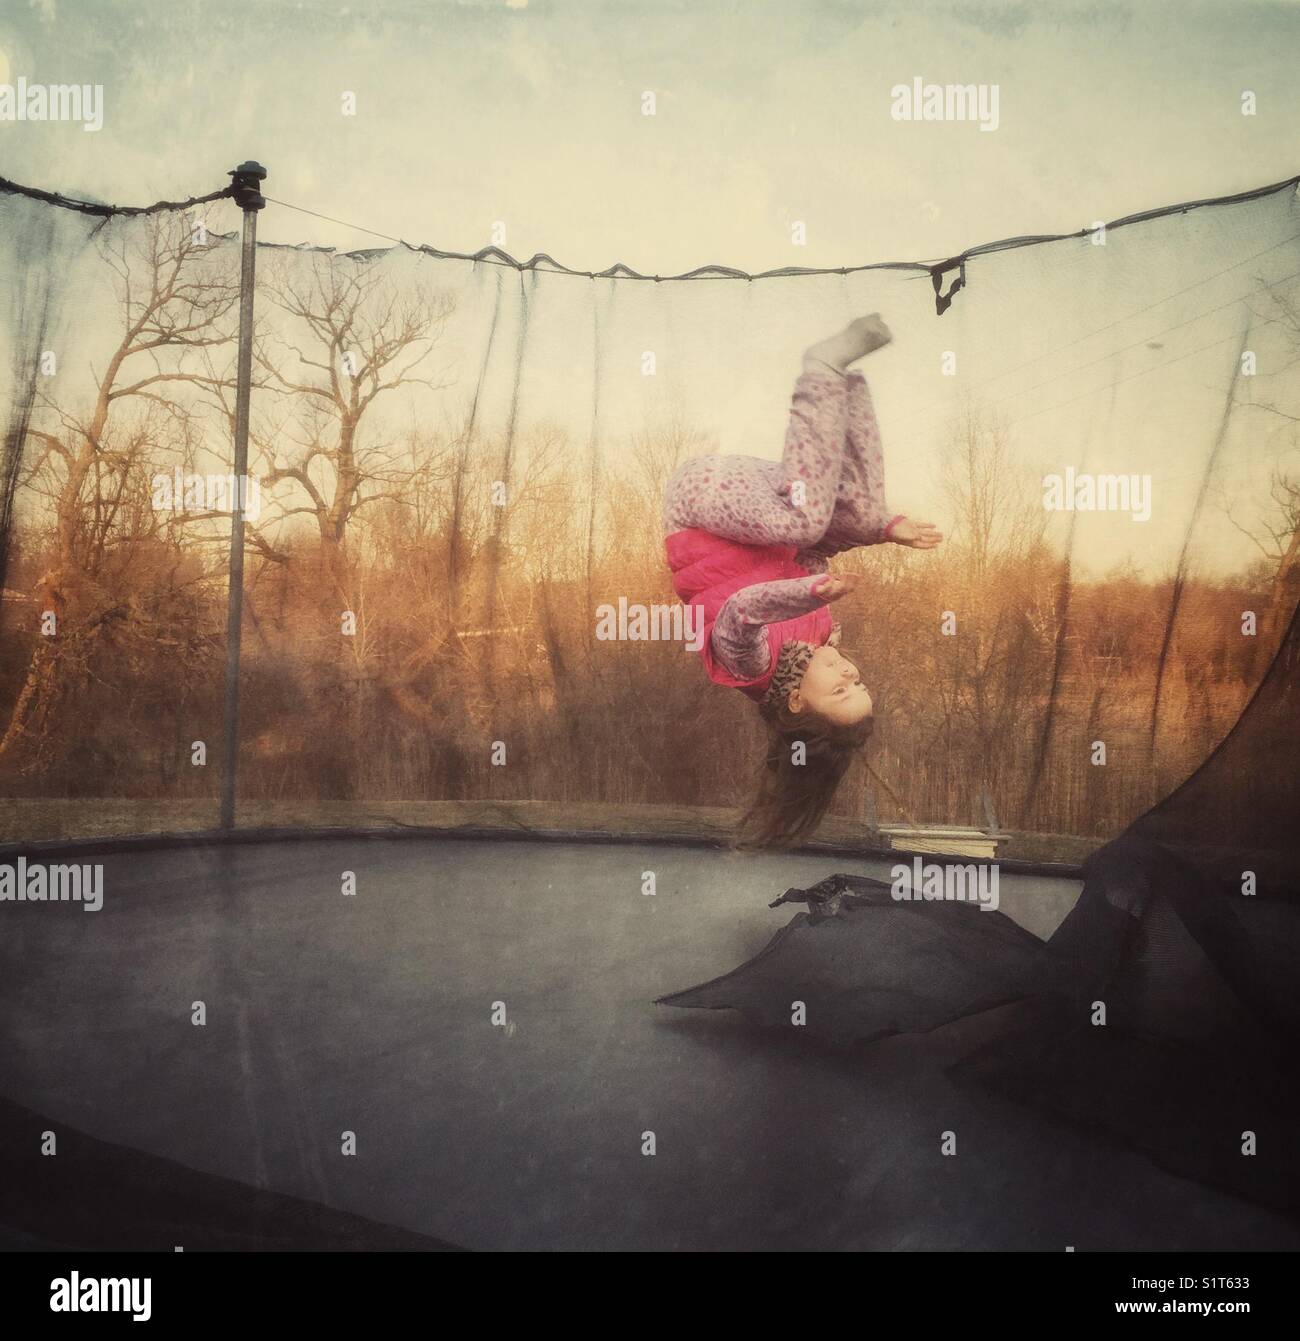 Girl captured in midst of doing flip in the air on a trampoline Stock Photo